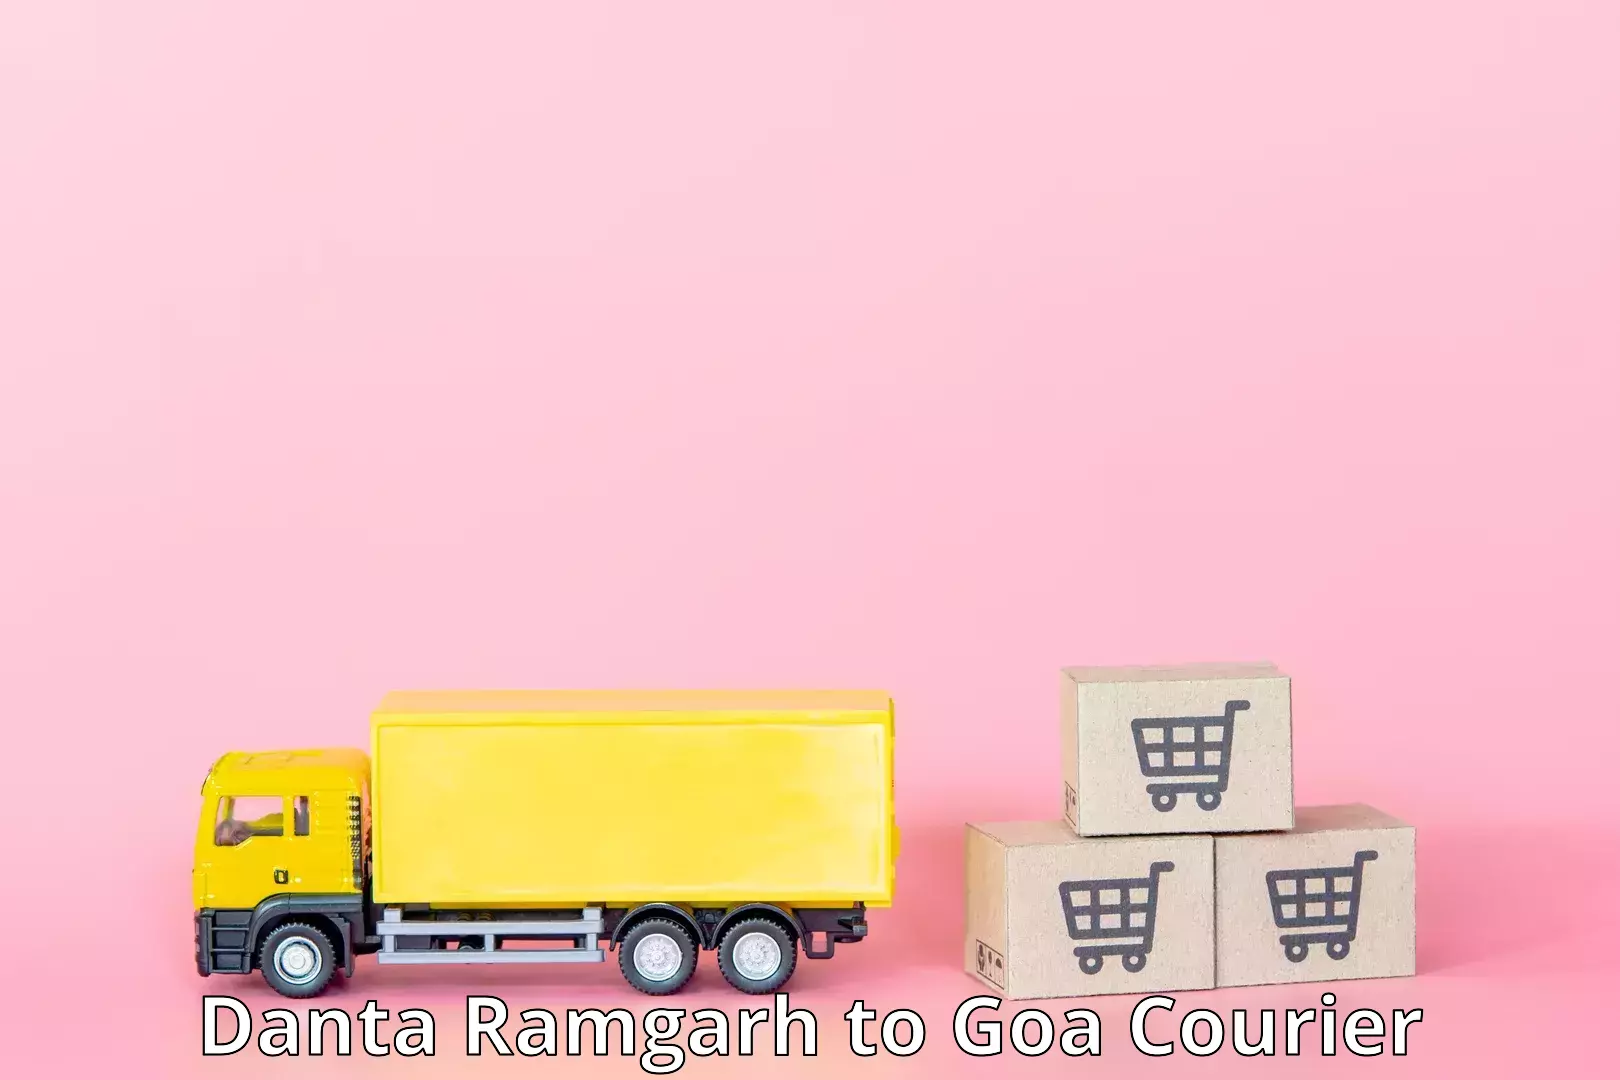 Nationwide delivery network Danta Ramgarh to South Goa